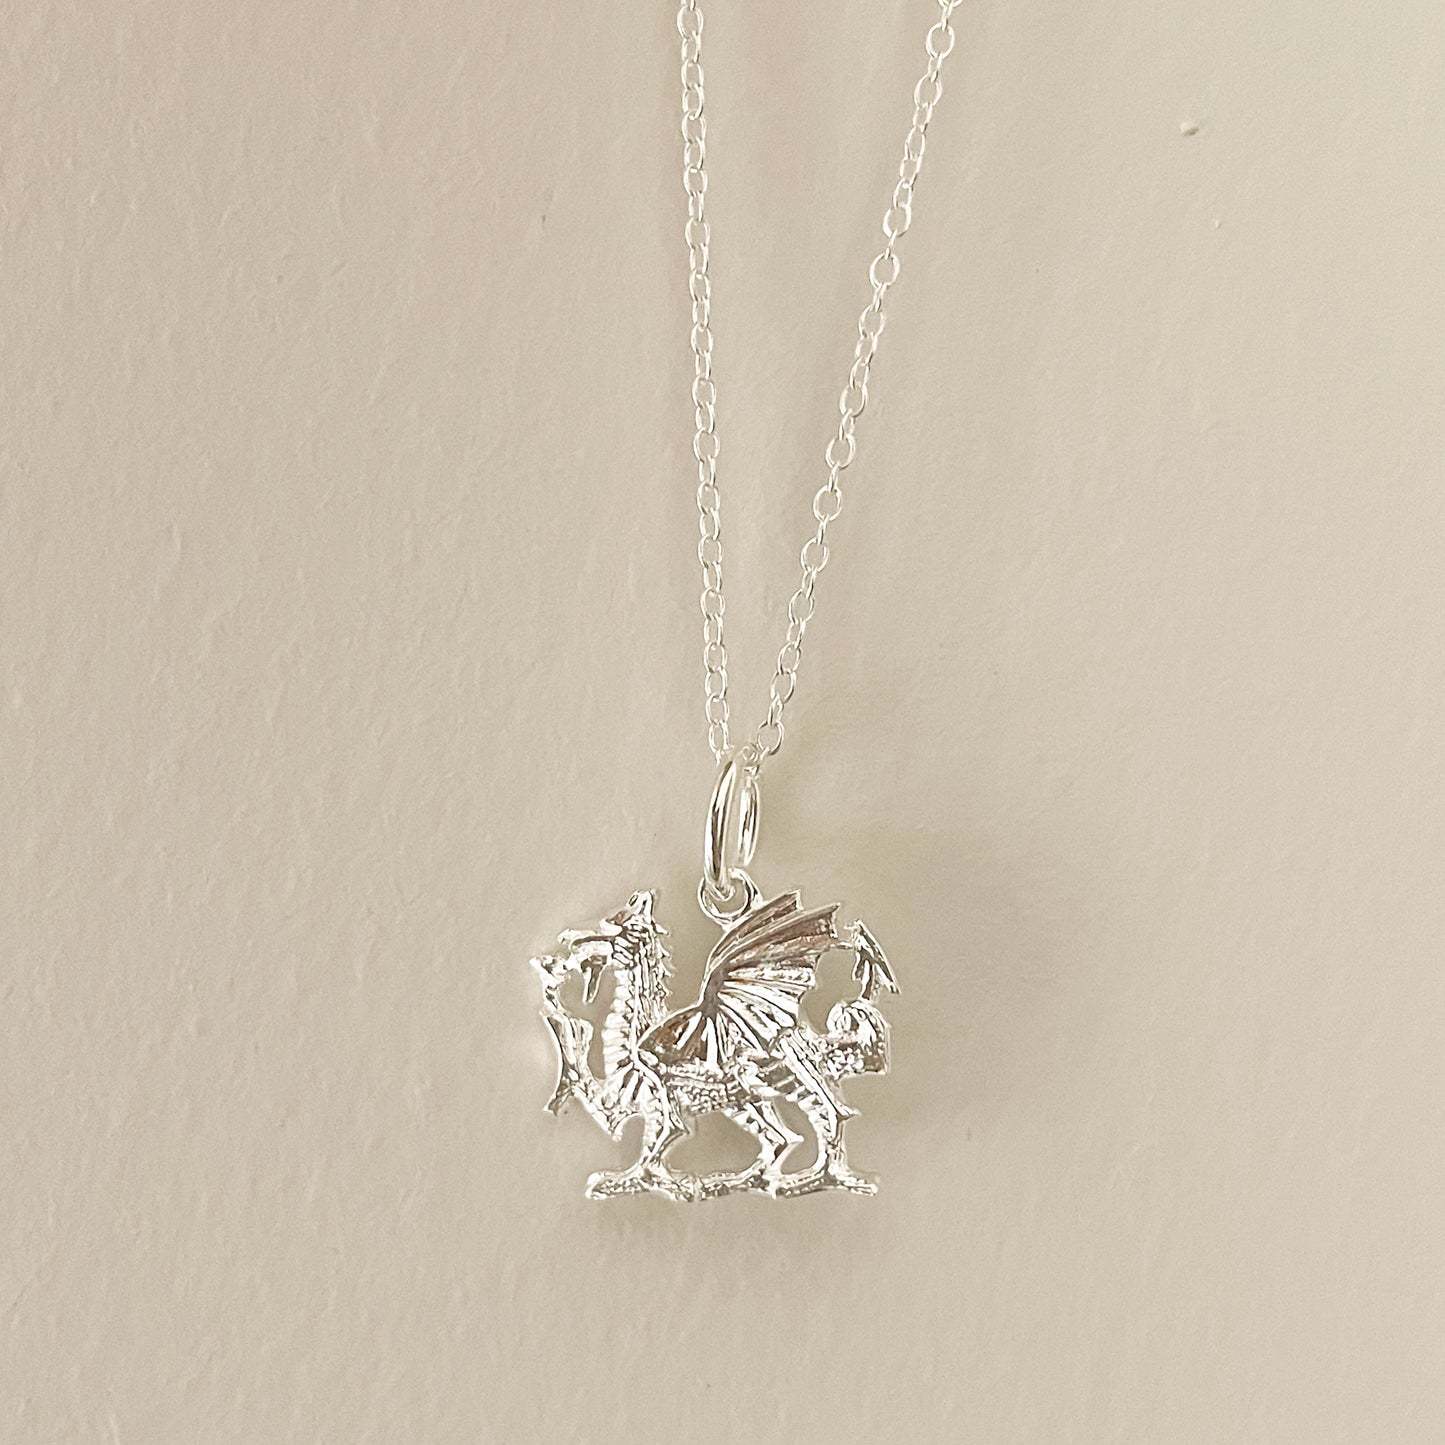 Necklace - Sterling Silver - Welsh Dragon - 16" Chain